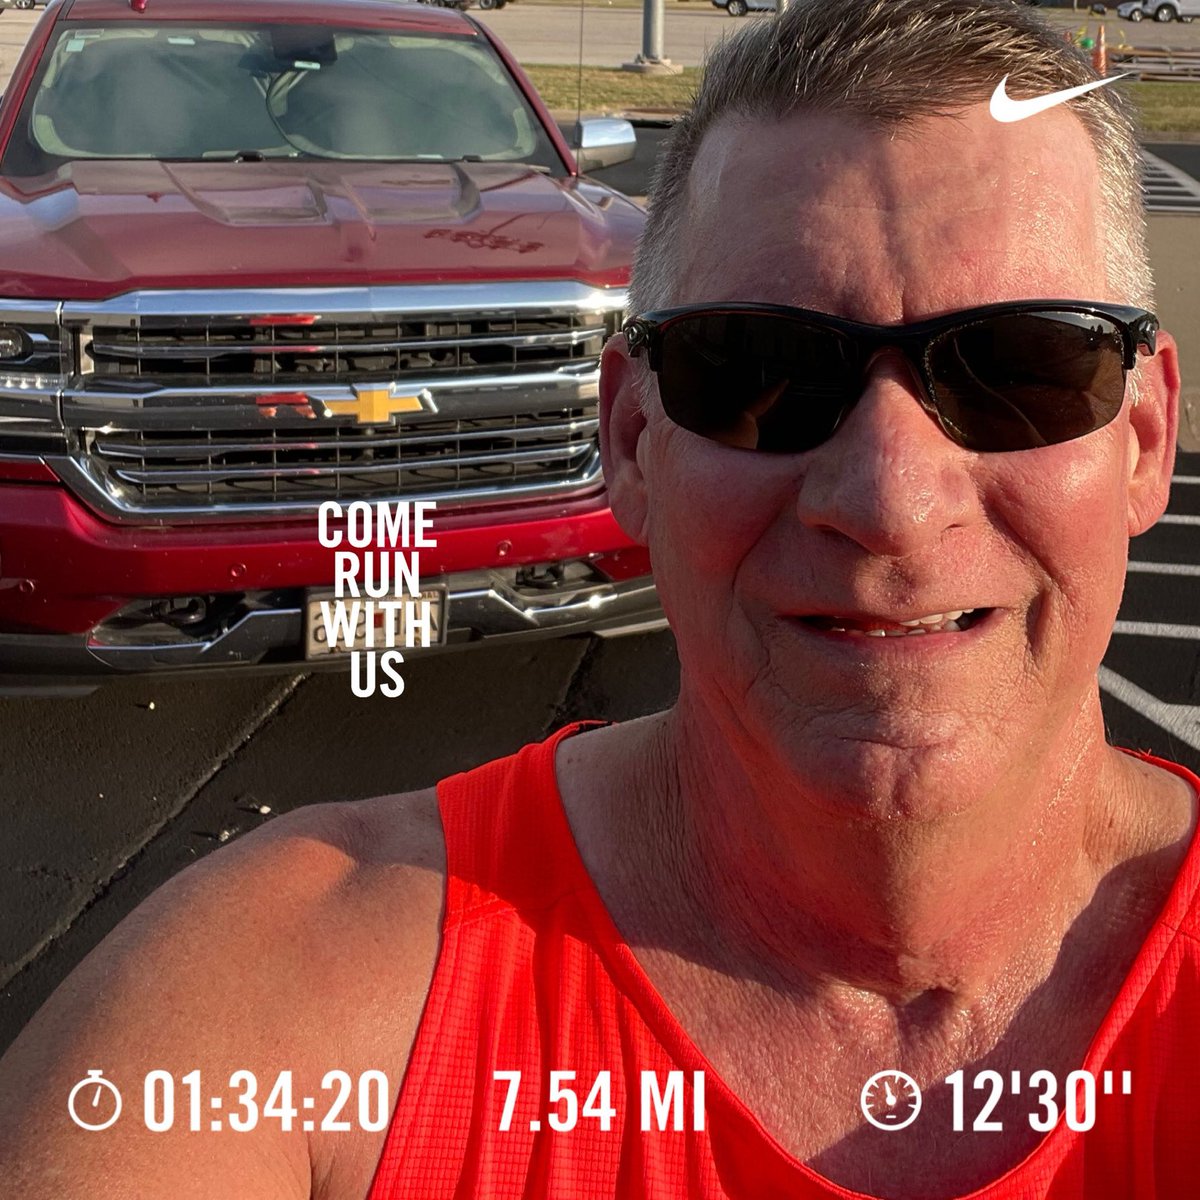 Good run, felt great out there! Perfect weather! Next up the KC Zoo 4 mile run!
#foryoudad
#foryoumom
#cantstopwontstoprunning
#pushingtheclockback